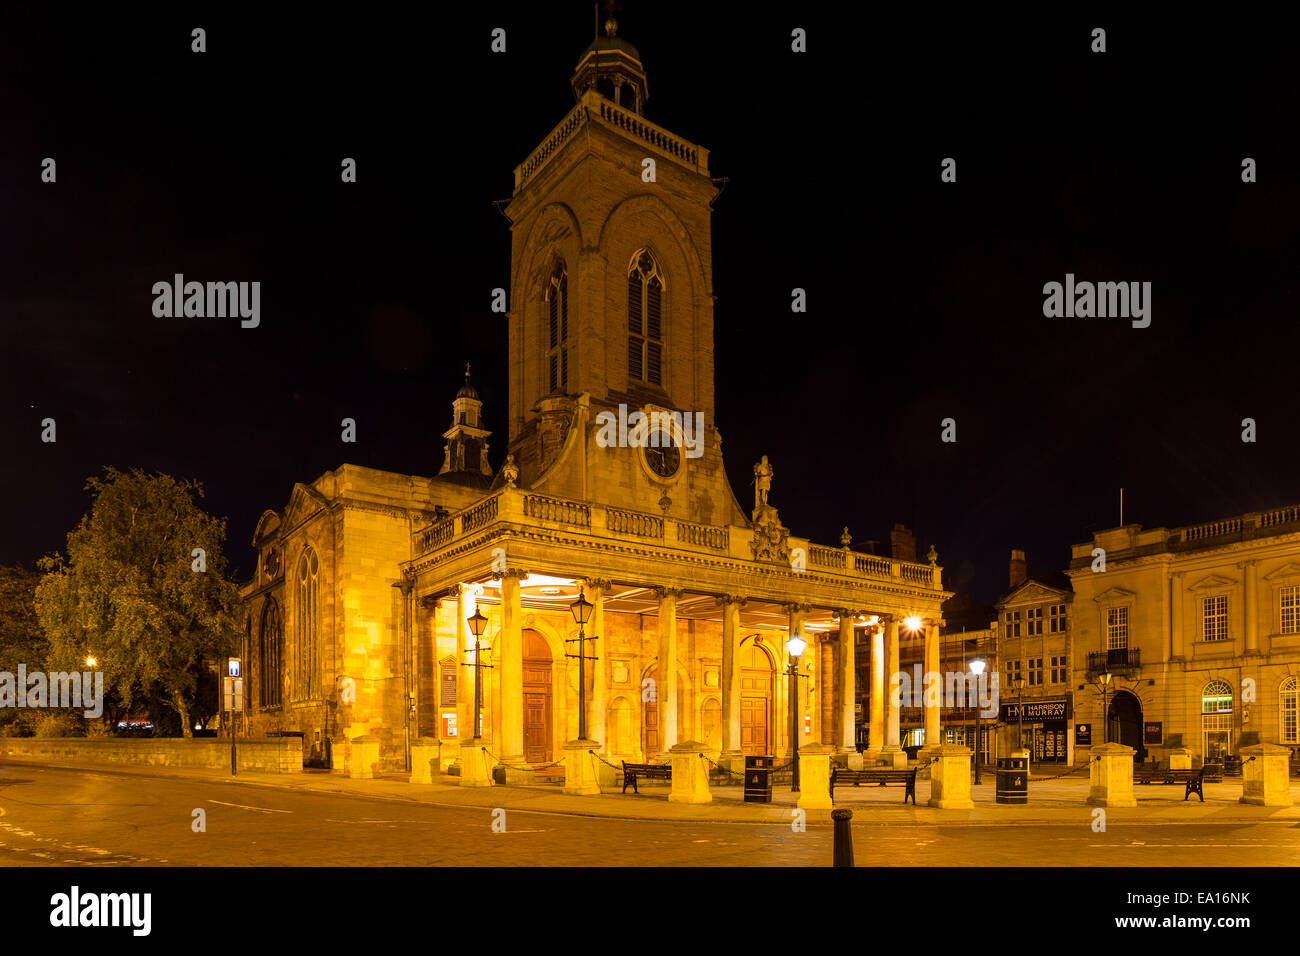 Early hours of the morning Northampton Town Centre, Stock Photo